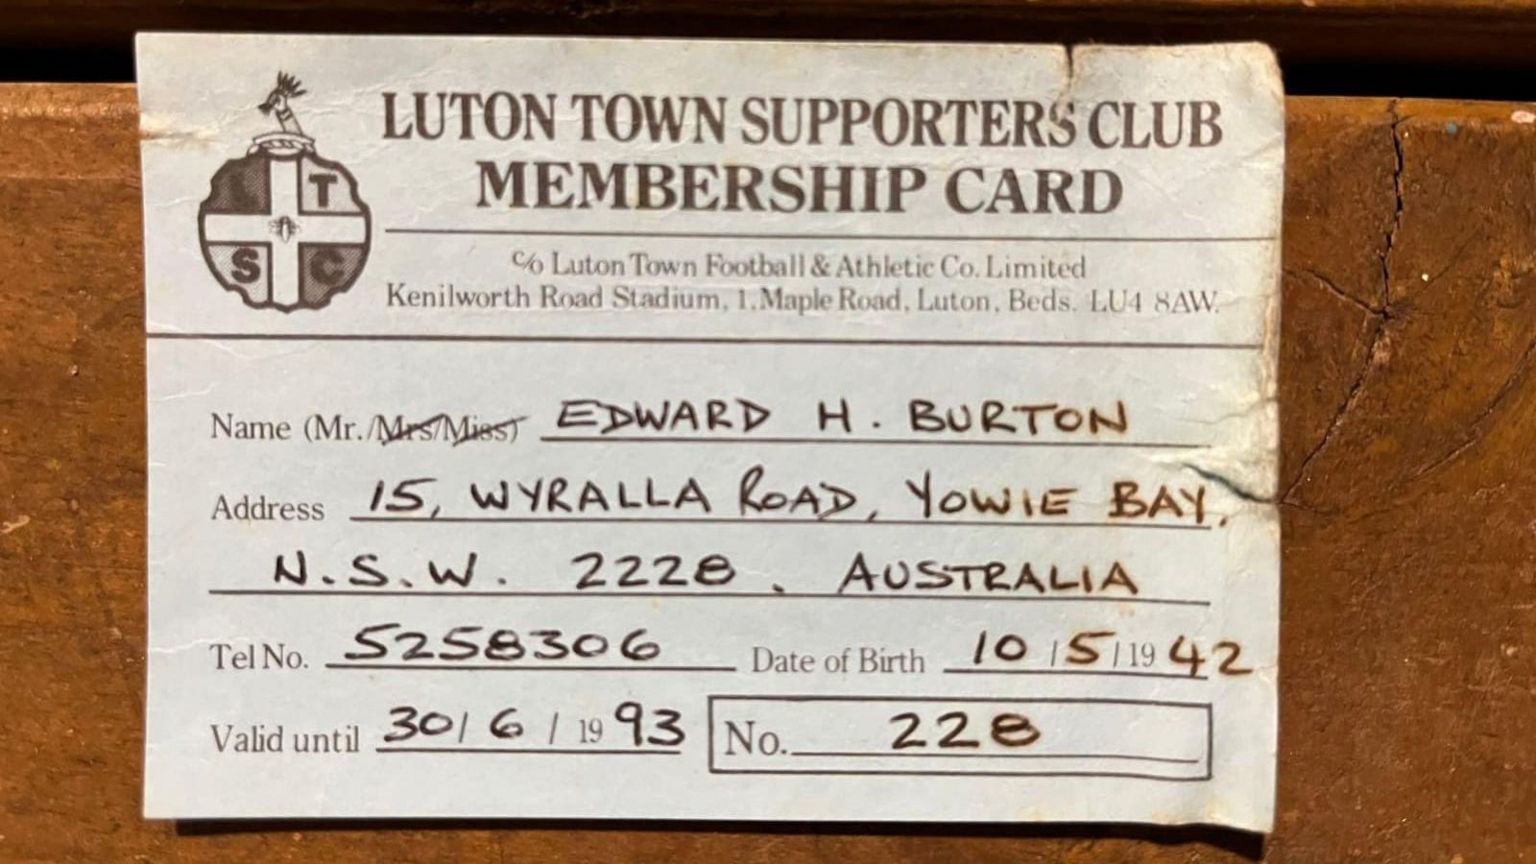 A Luton Town Supporters Membership Card used by David's father in the 90s